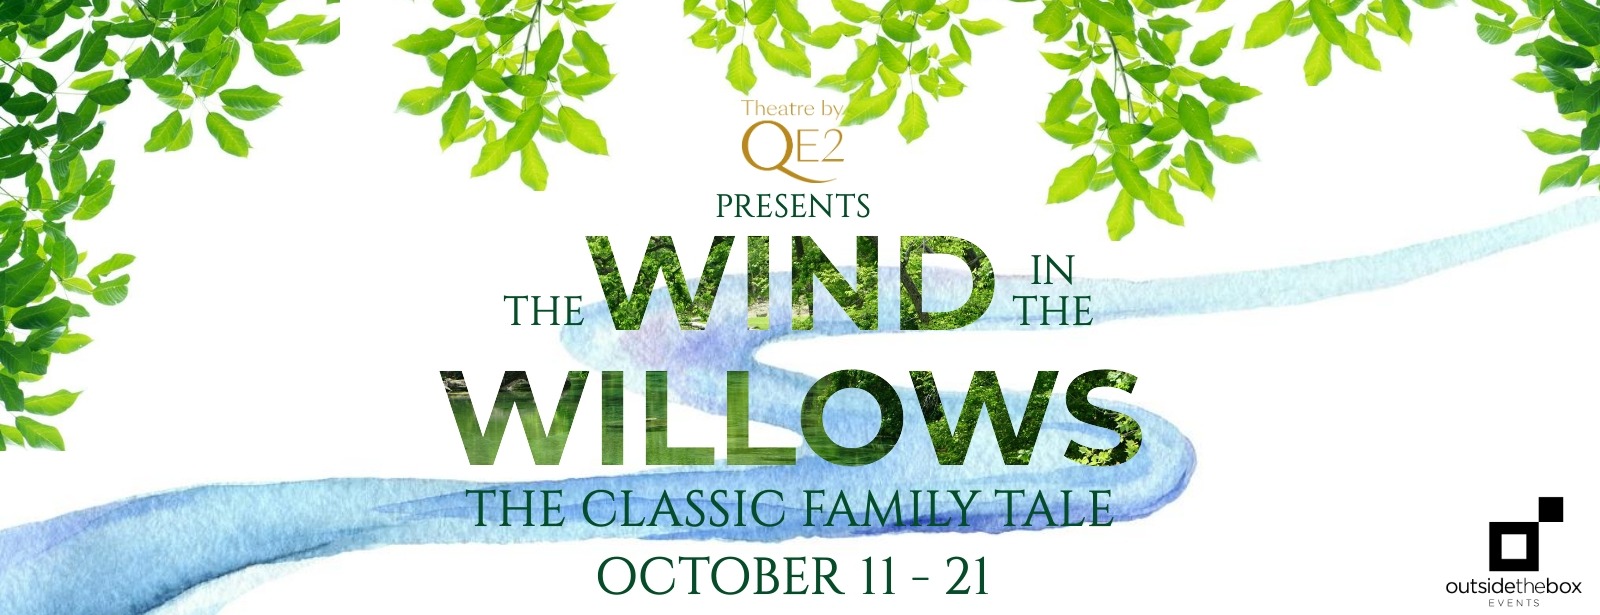 Theatre by QE2 – The Wind In The Willows - Coming Soon in UAE